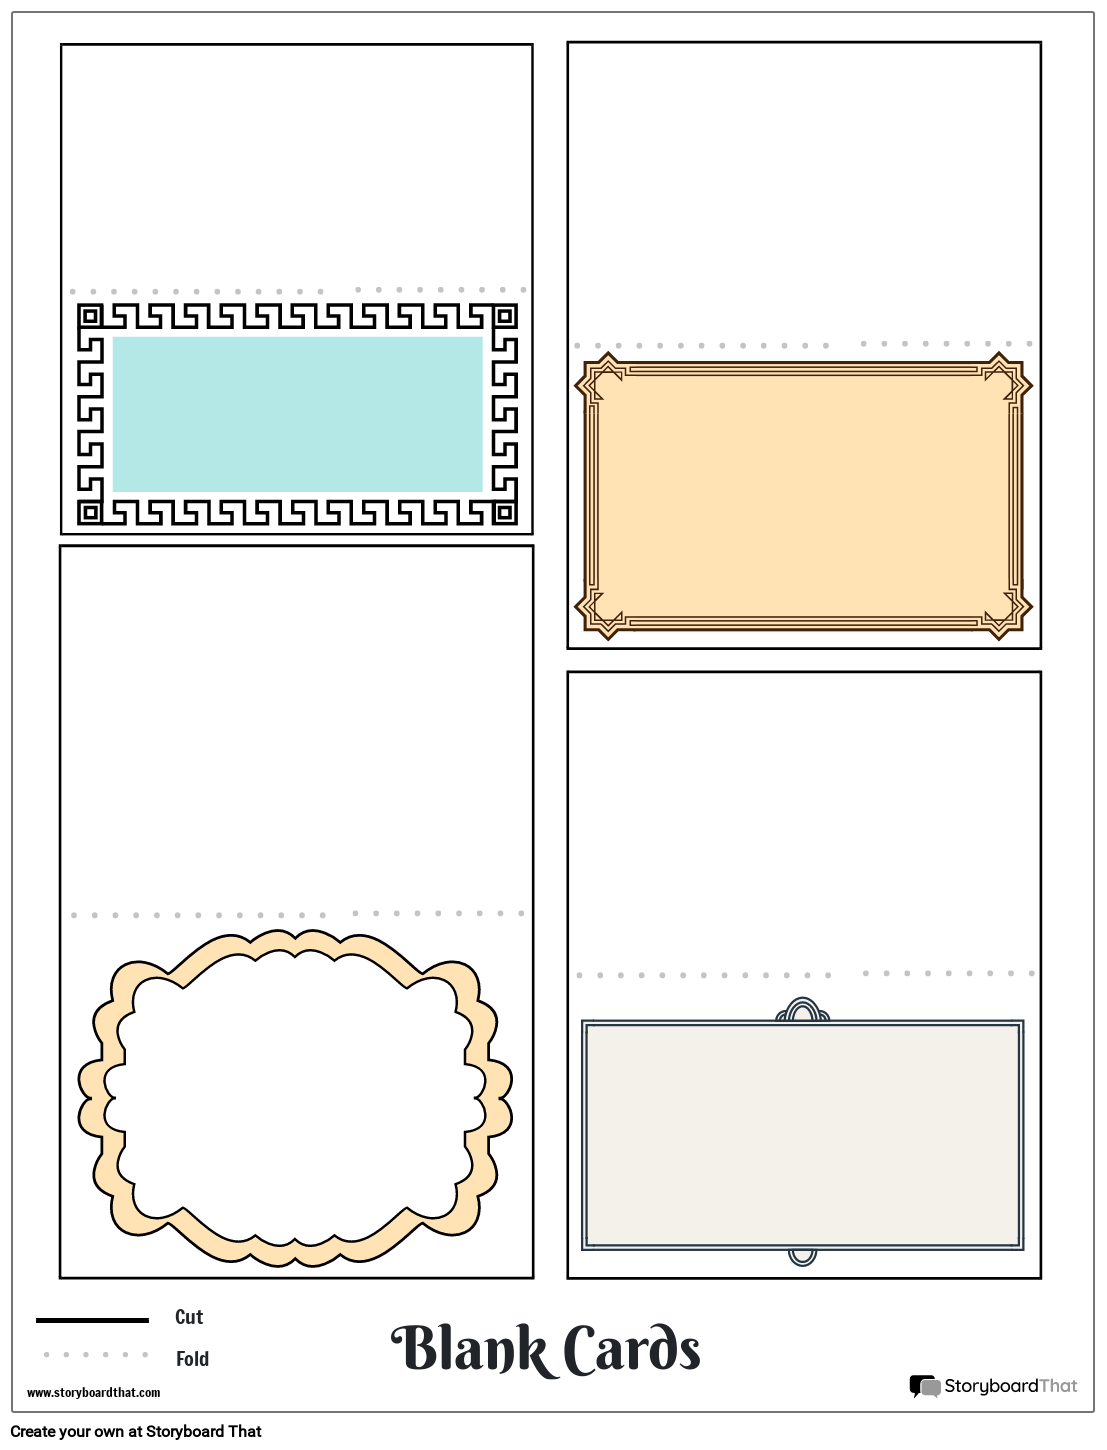 Blank Card Worksheet with Different Colorful Shapes